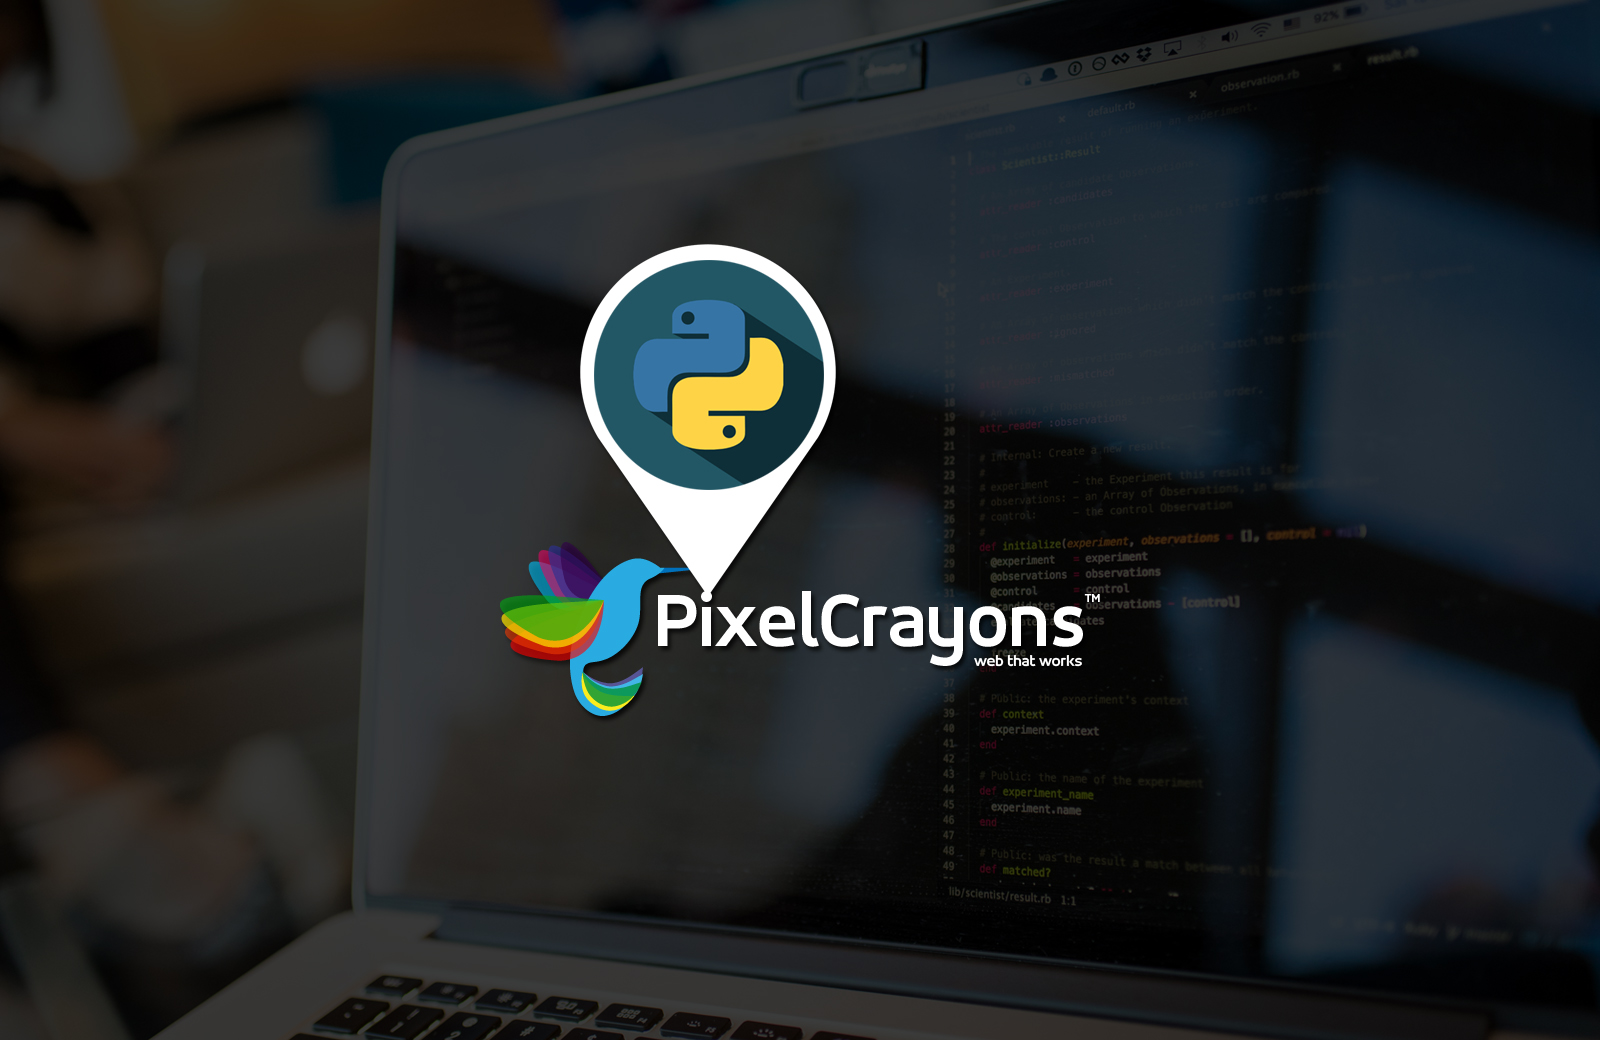 PixelCrayons Featured as a Top Python Development Company